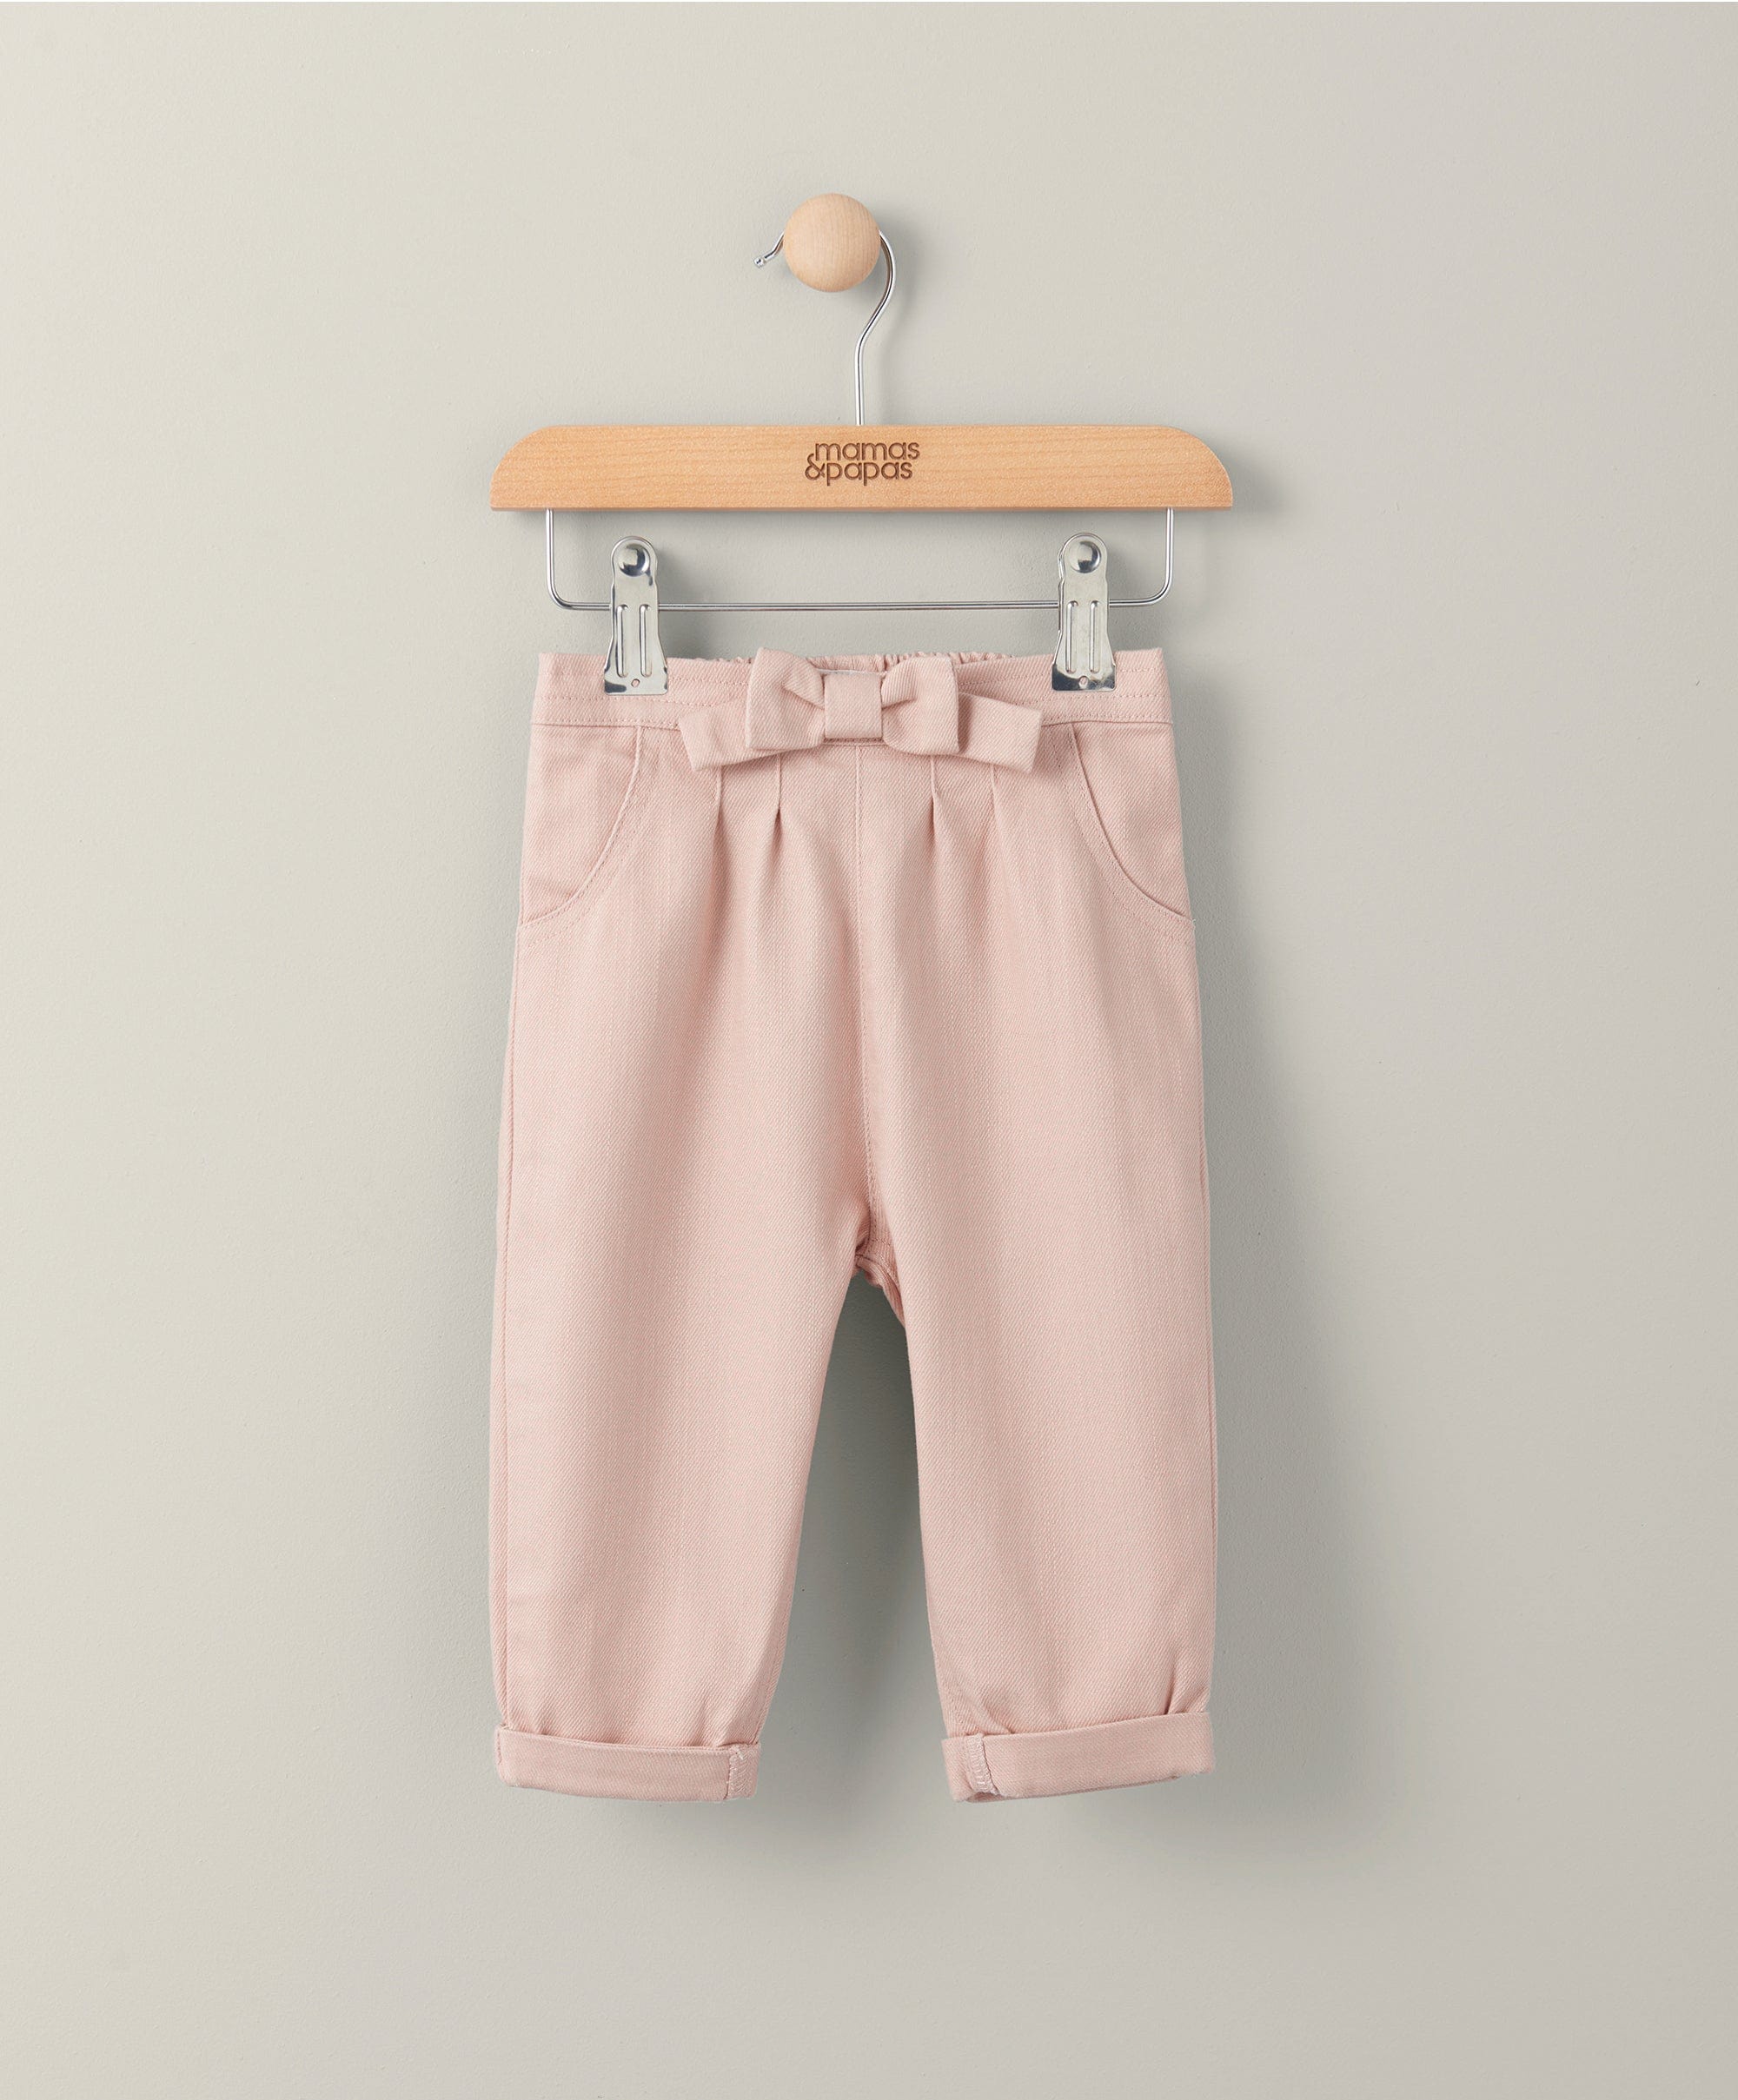 Zara Baby Bodysuits Rompers And owl Pants 6-9 Months 3-6 months gray pink  girls